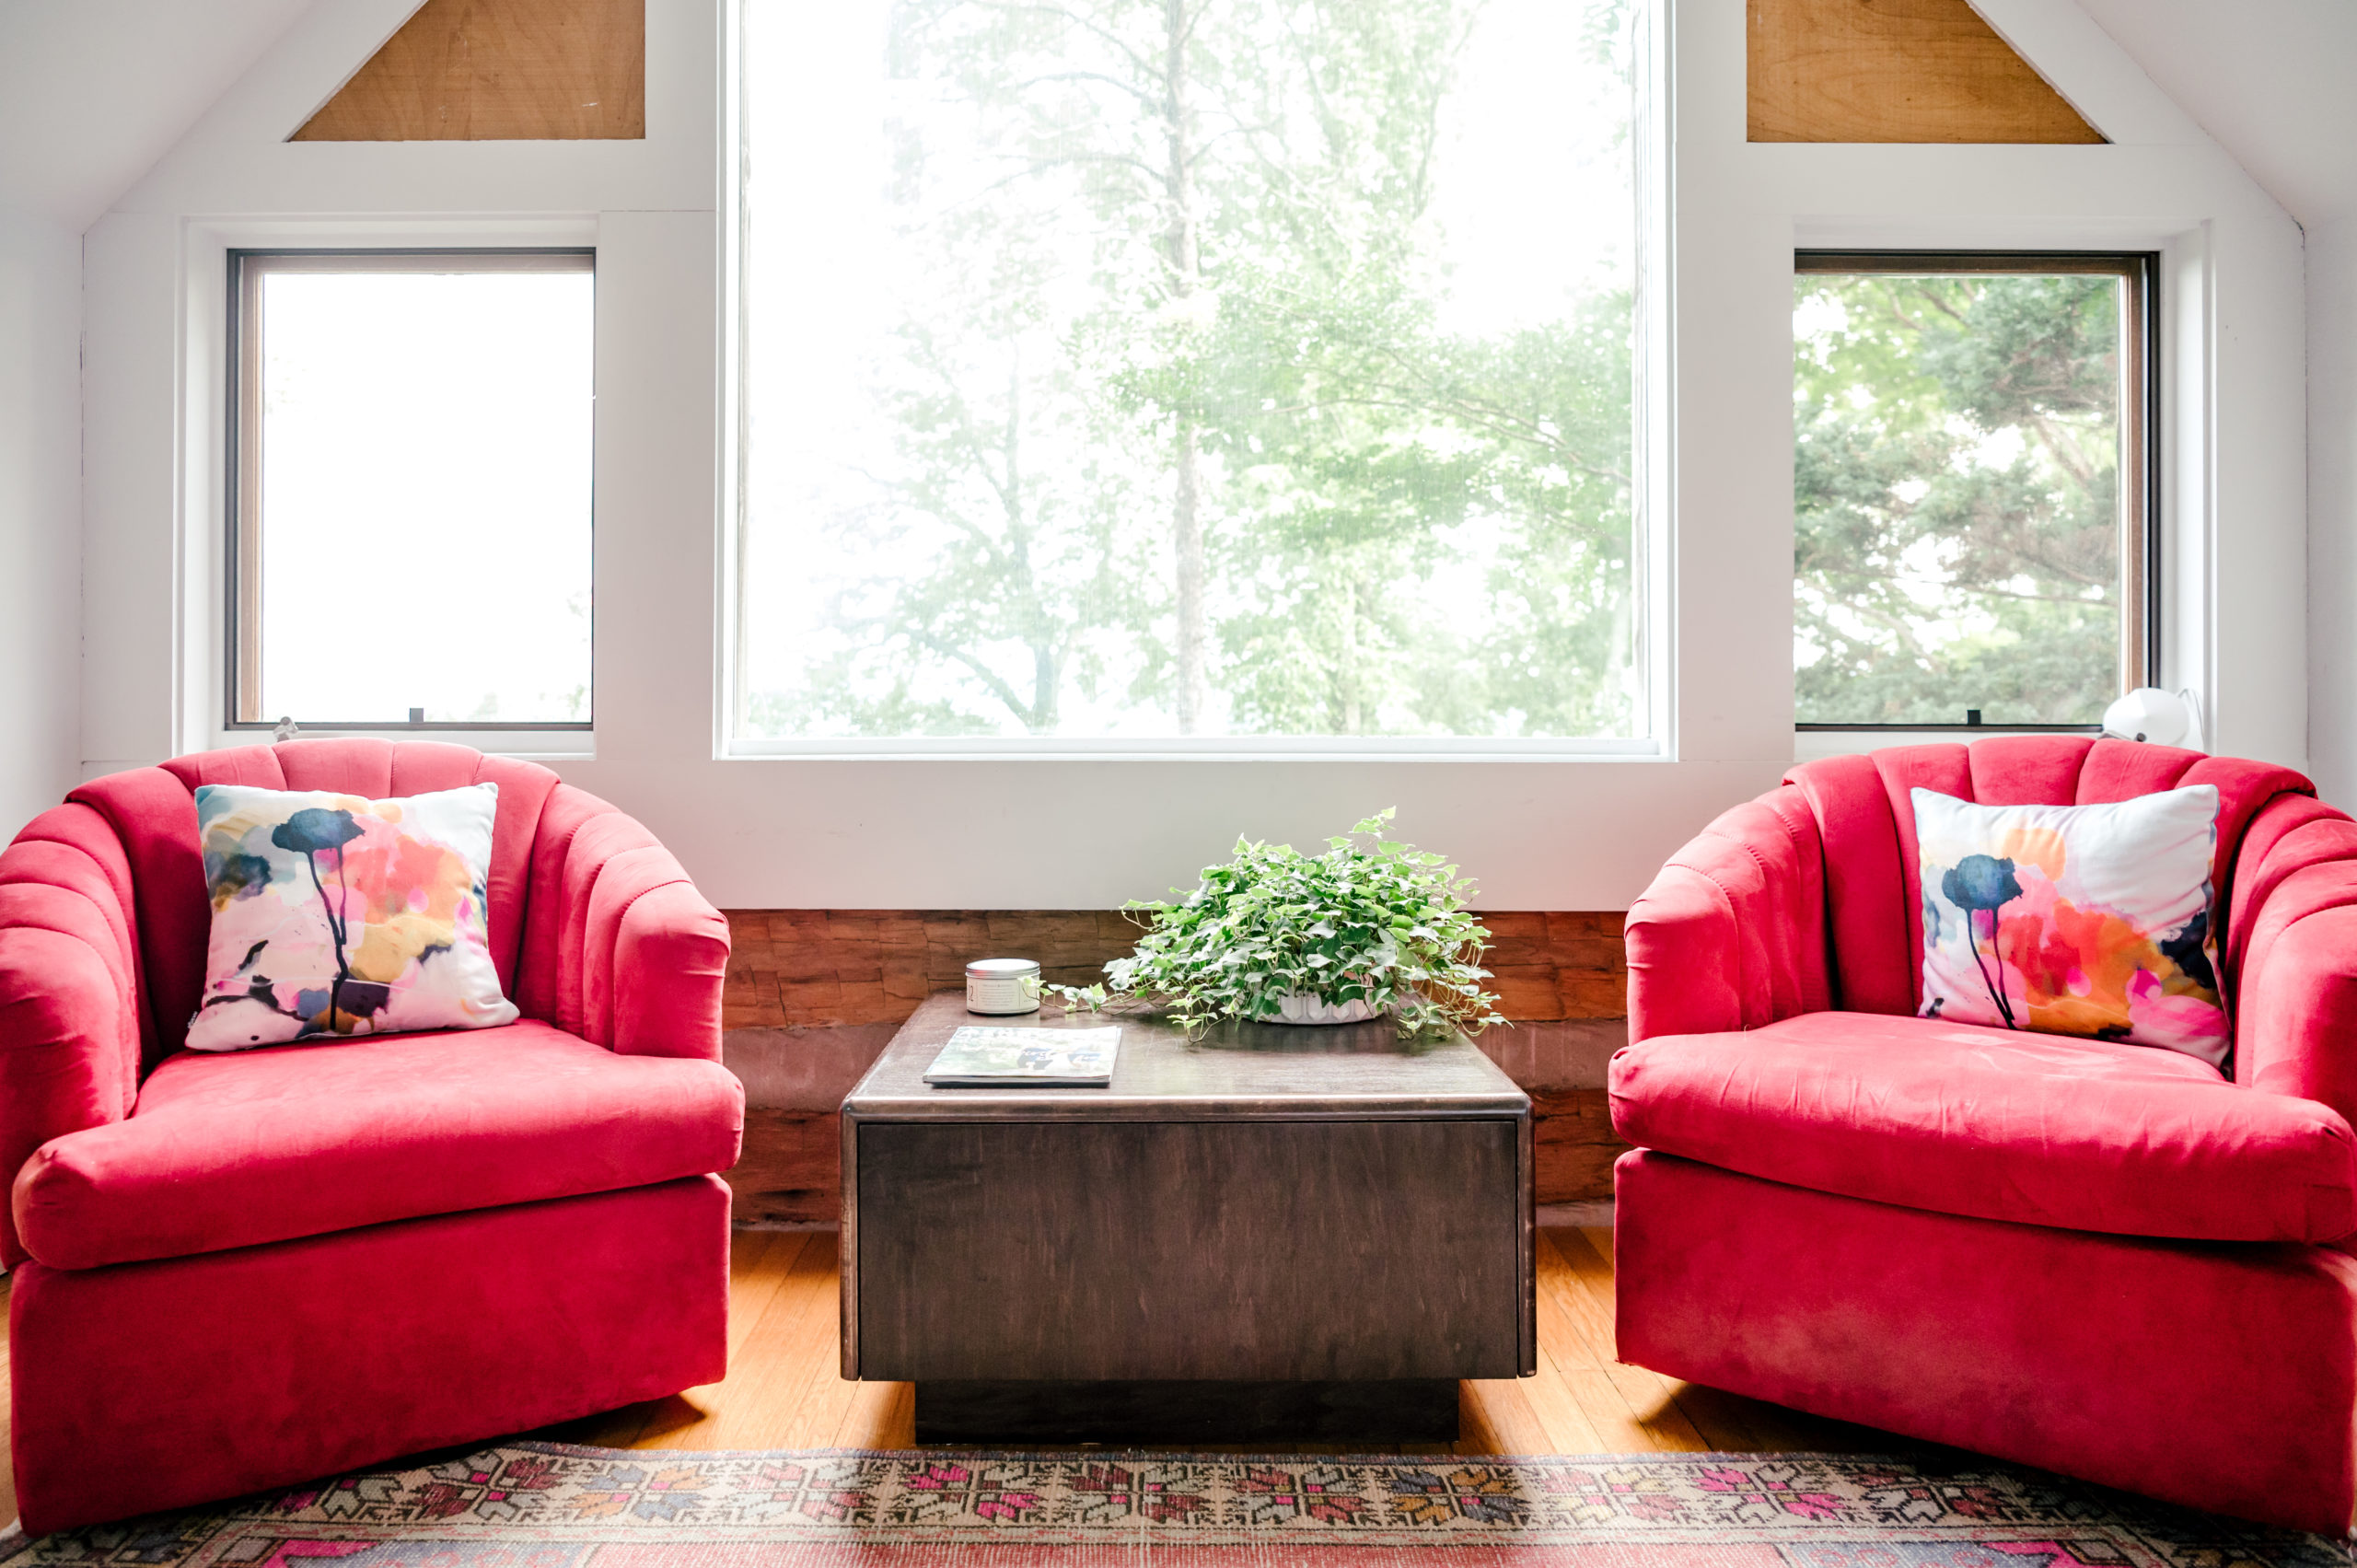 Photo of living room interior furniture, with a wooden table between two red love seats with pillows sitting on them by a Houston Interior Photographer